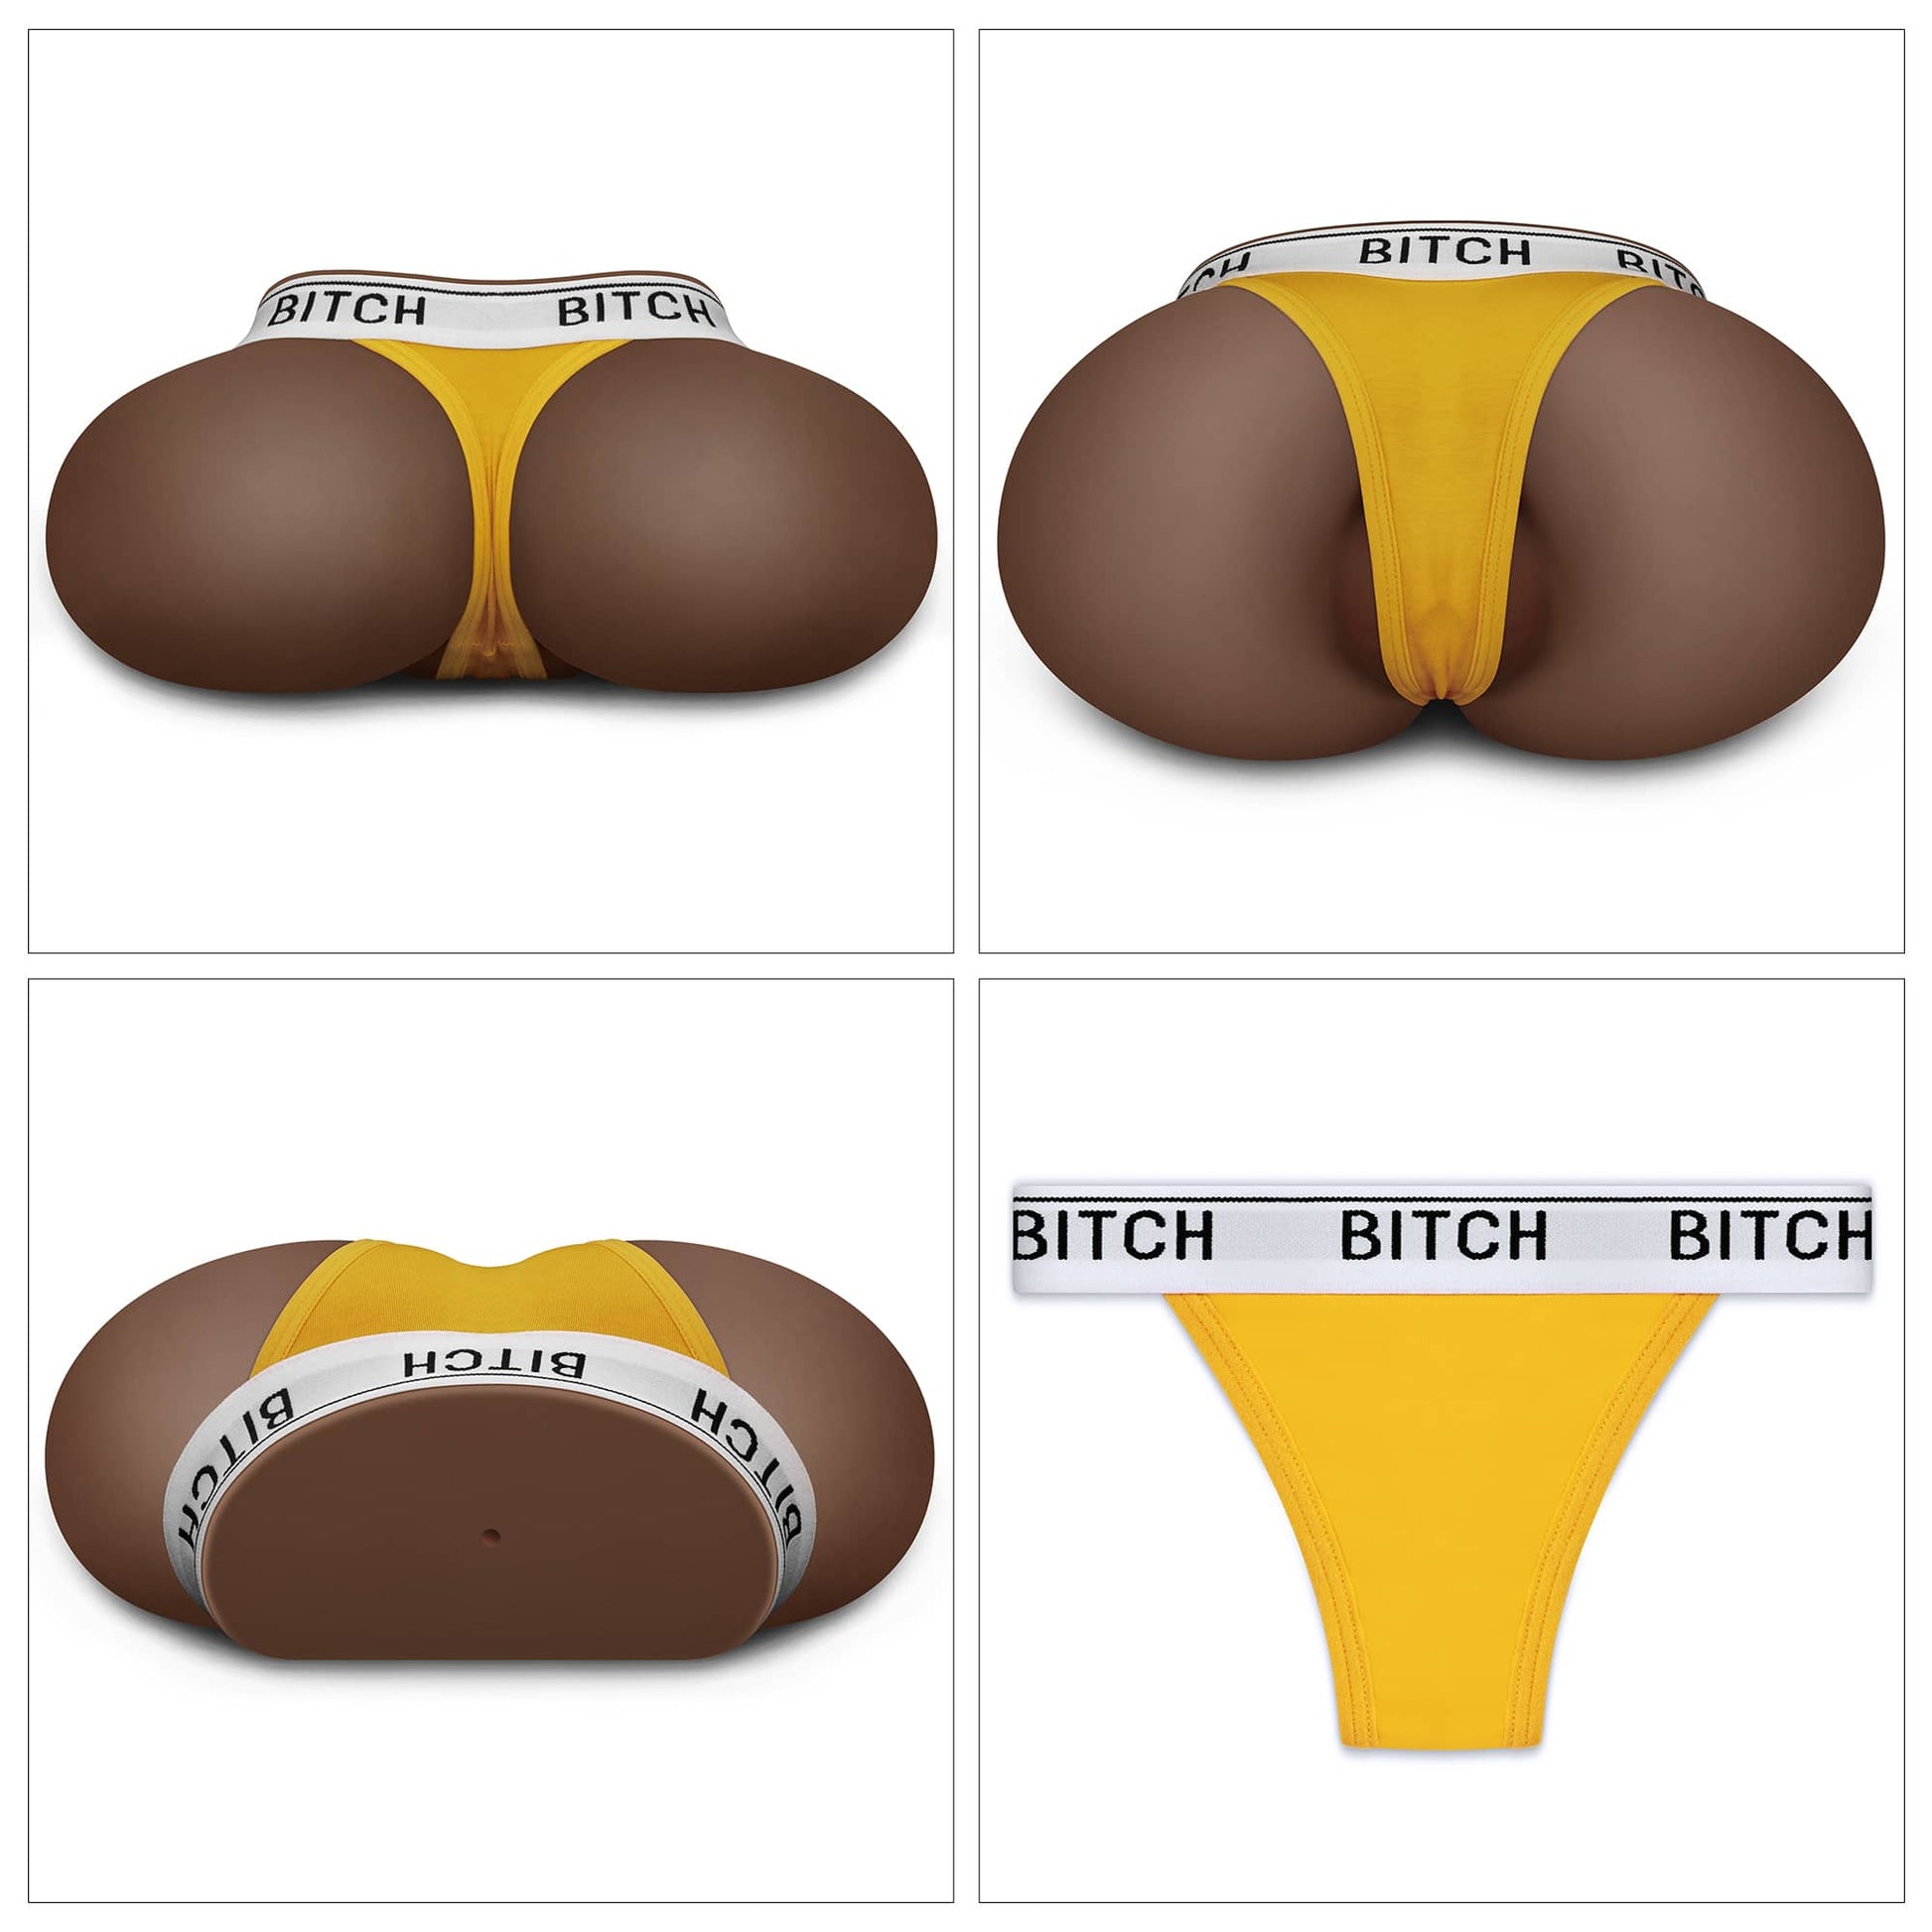 The brown vagina ass male masturbator comes with a sexy yellow thong